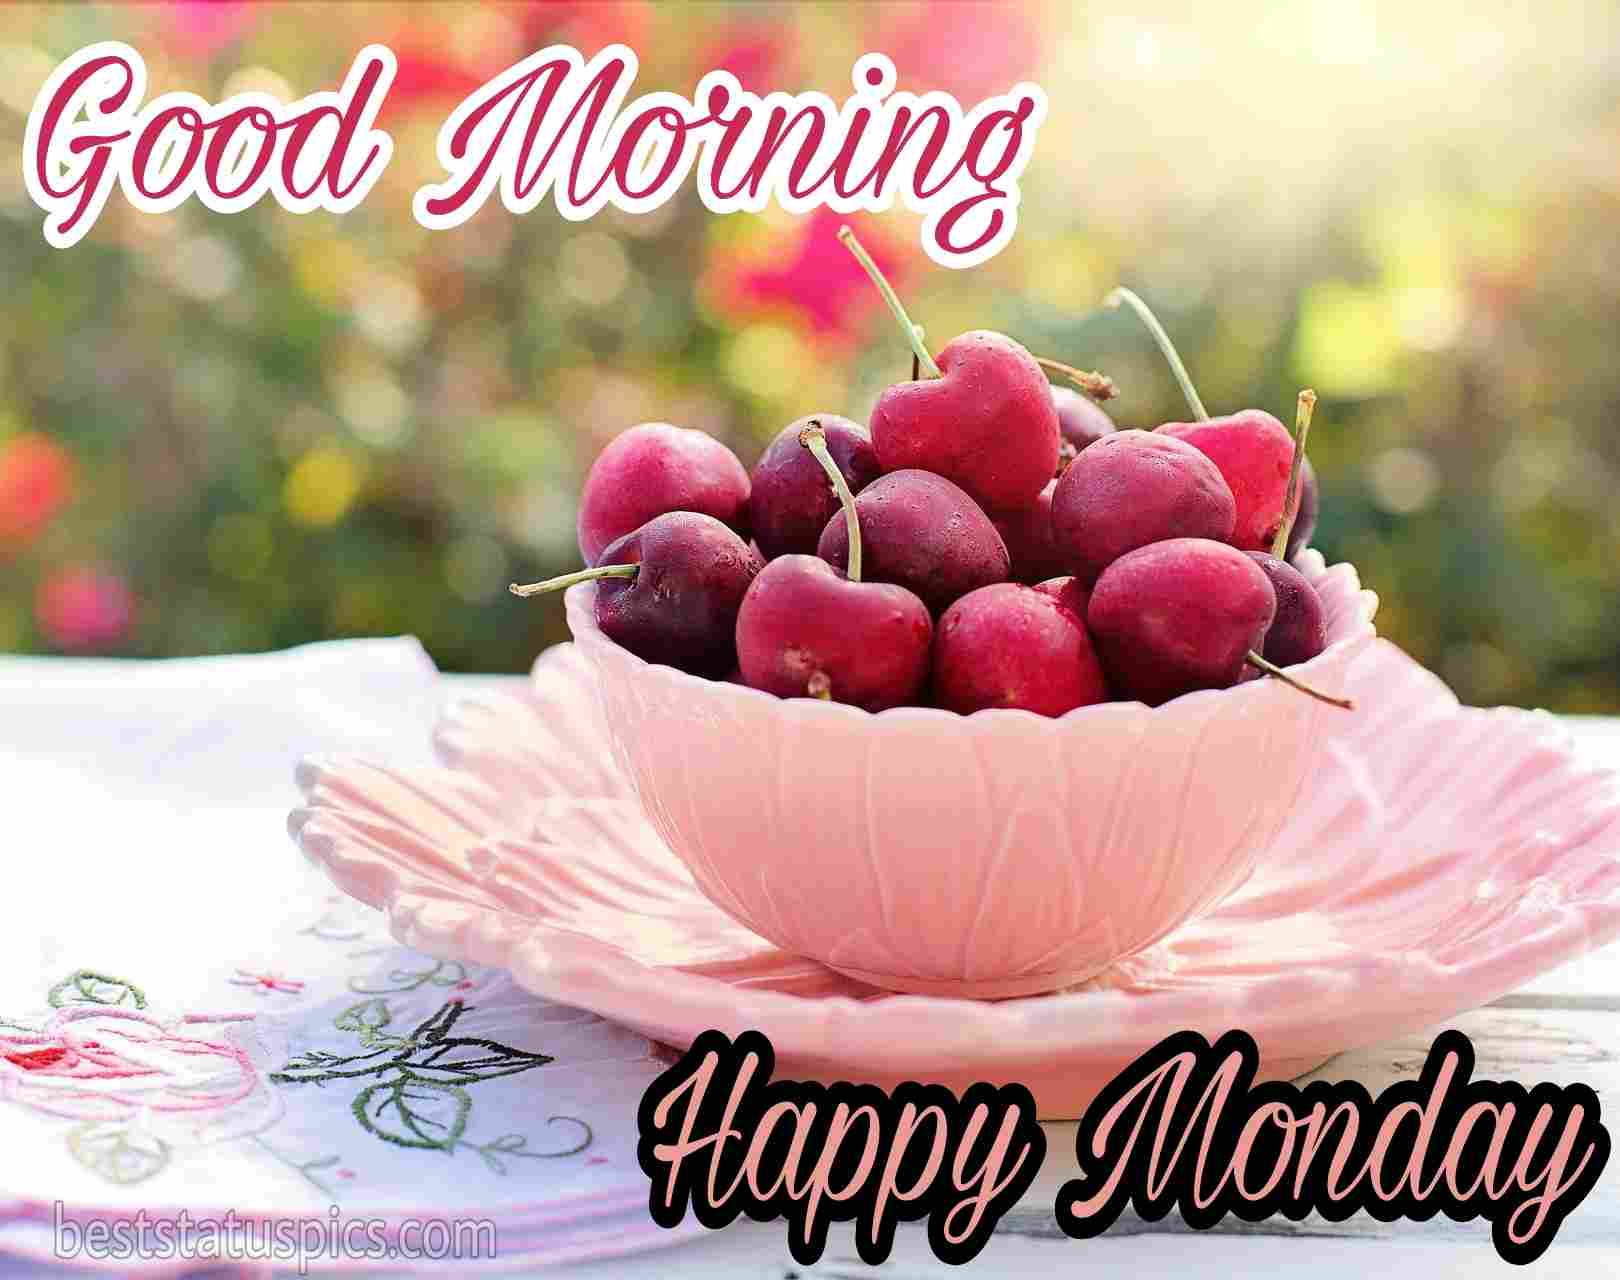 51+ Good Morning Happy Monday Images HD, Quotes [2021] | Best Status Pics